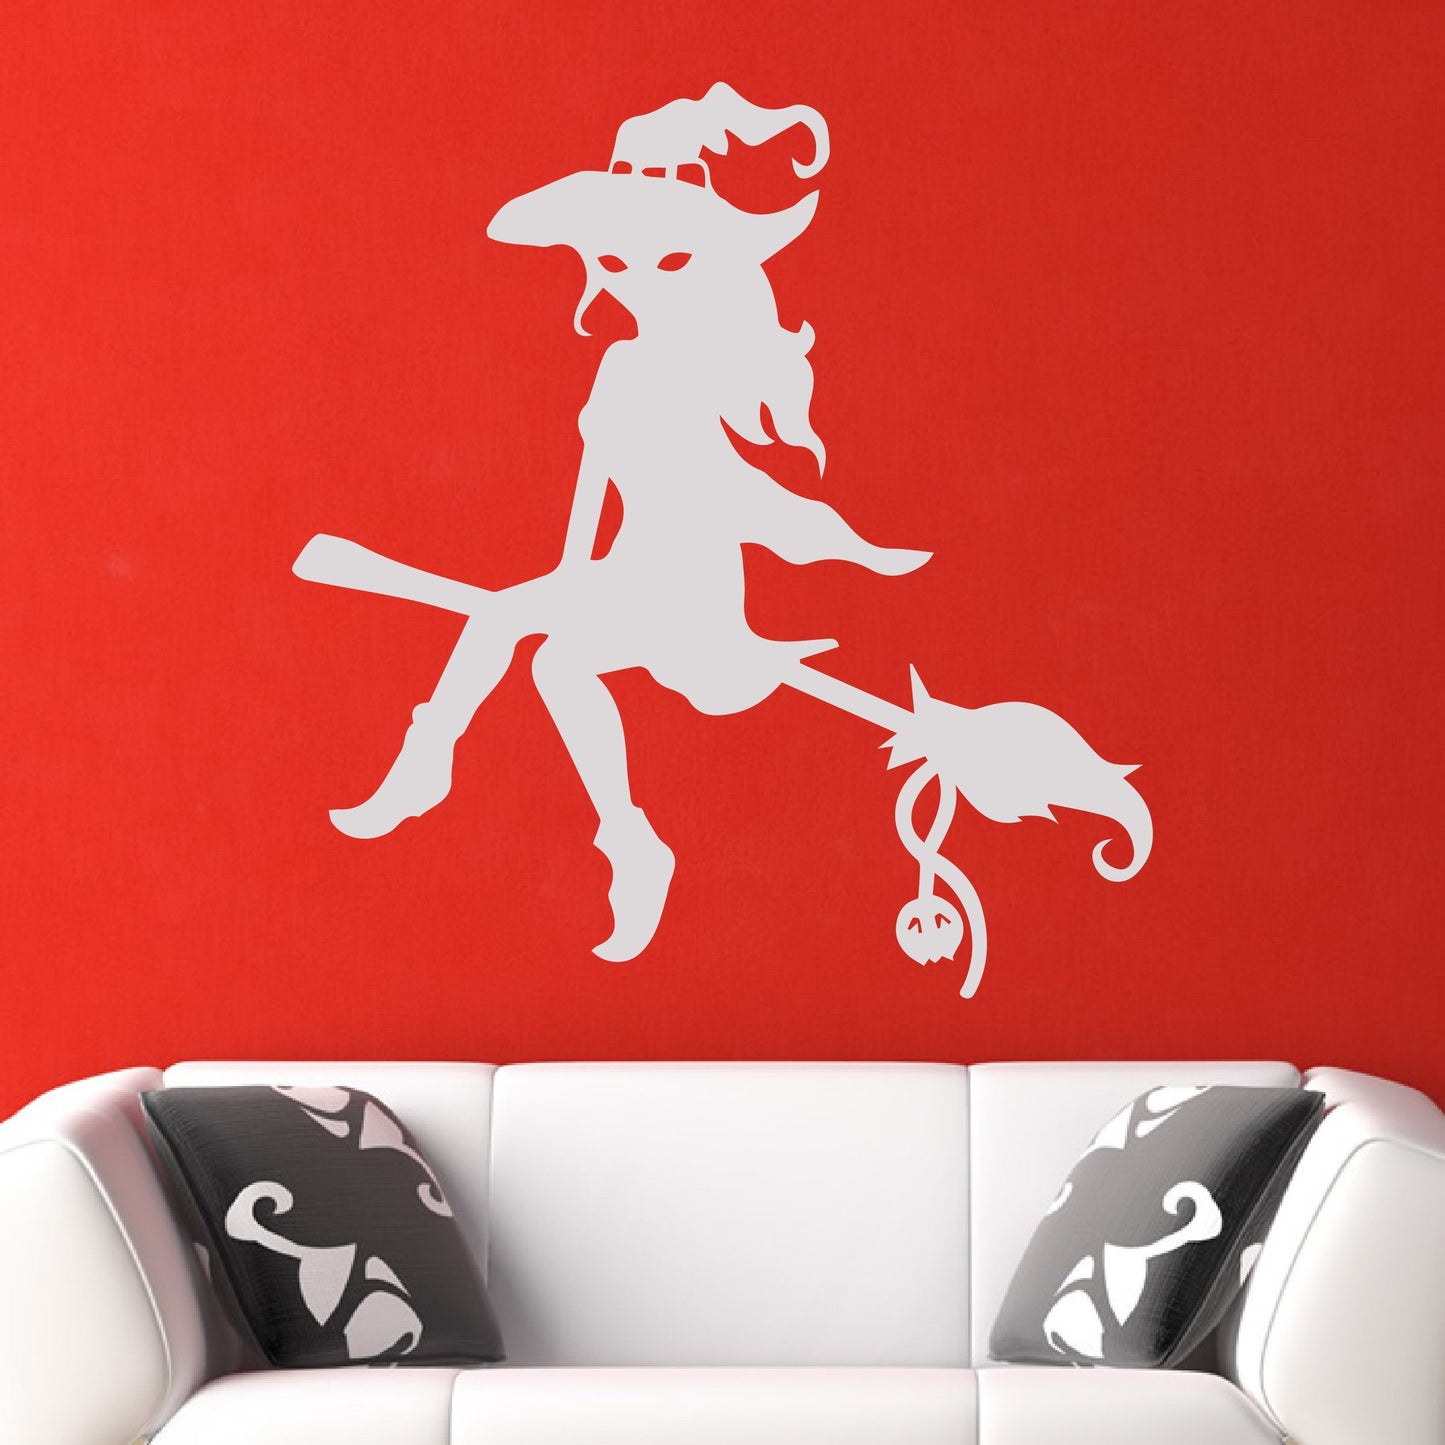 Witch on Broomstick Halloween Wall Art Sticker | Apex Stickers